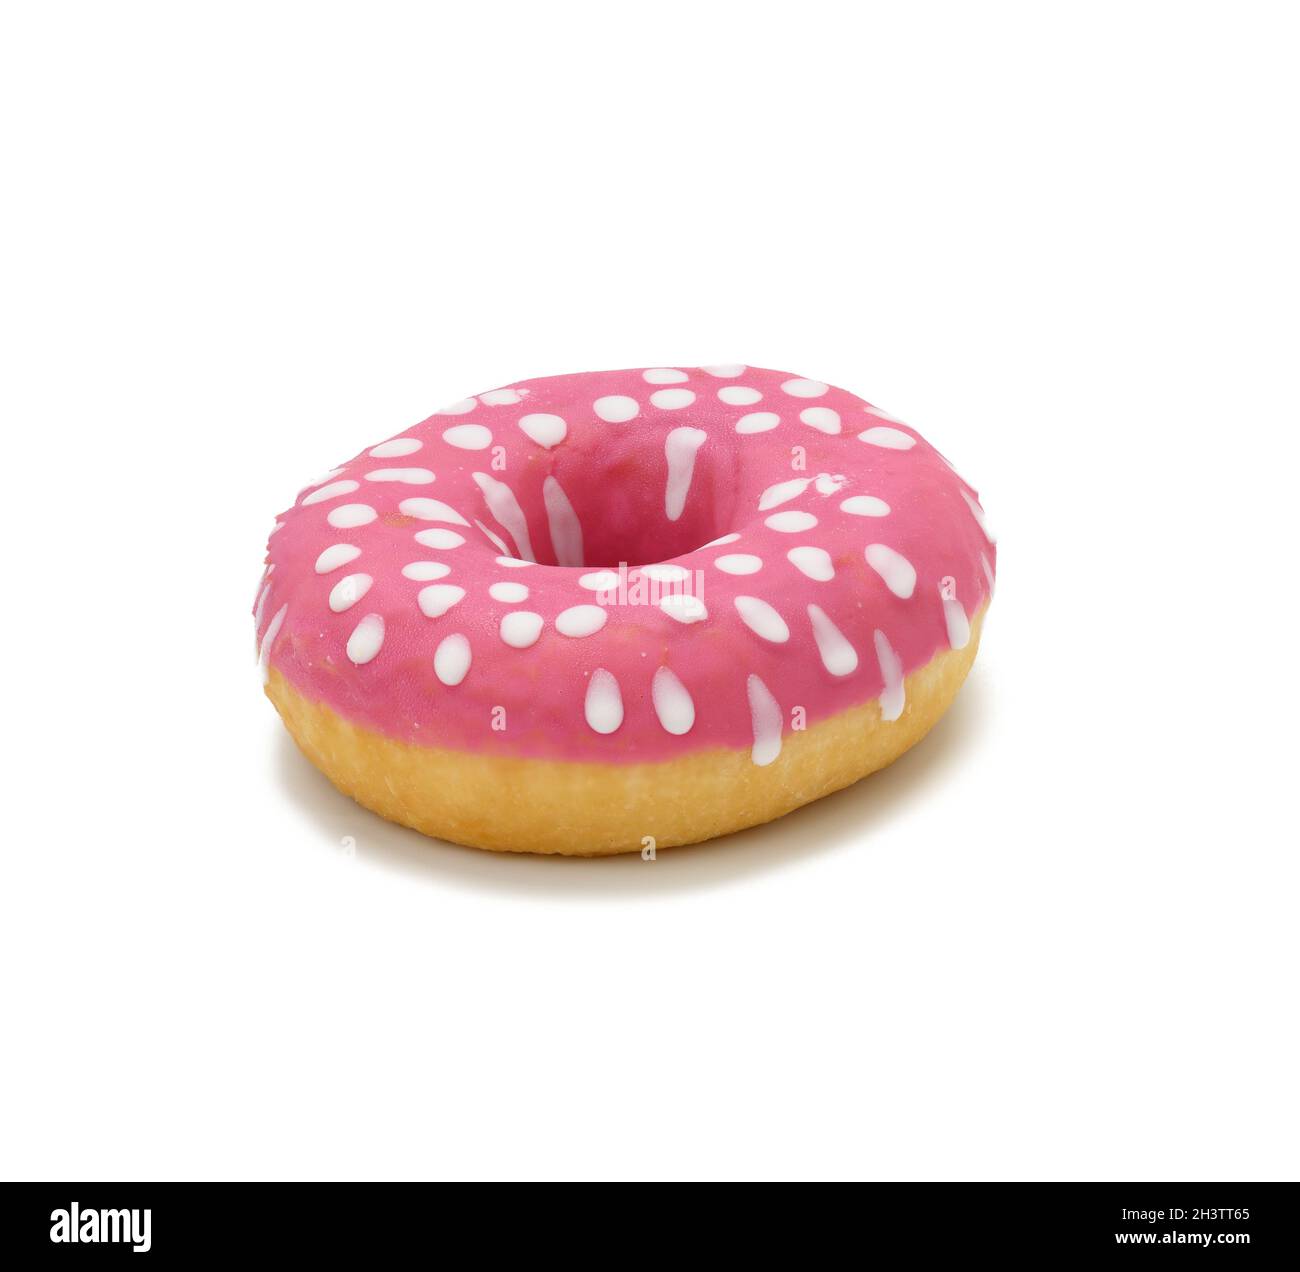 Baked round donut with pink icing and white dots isolated on white background Stock Photo